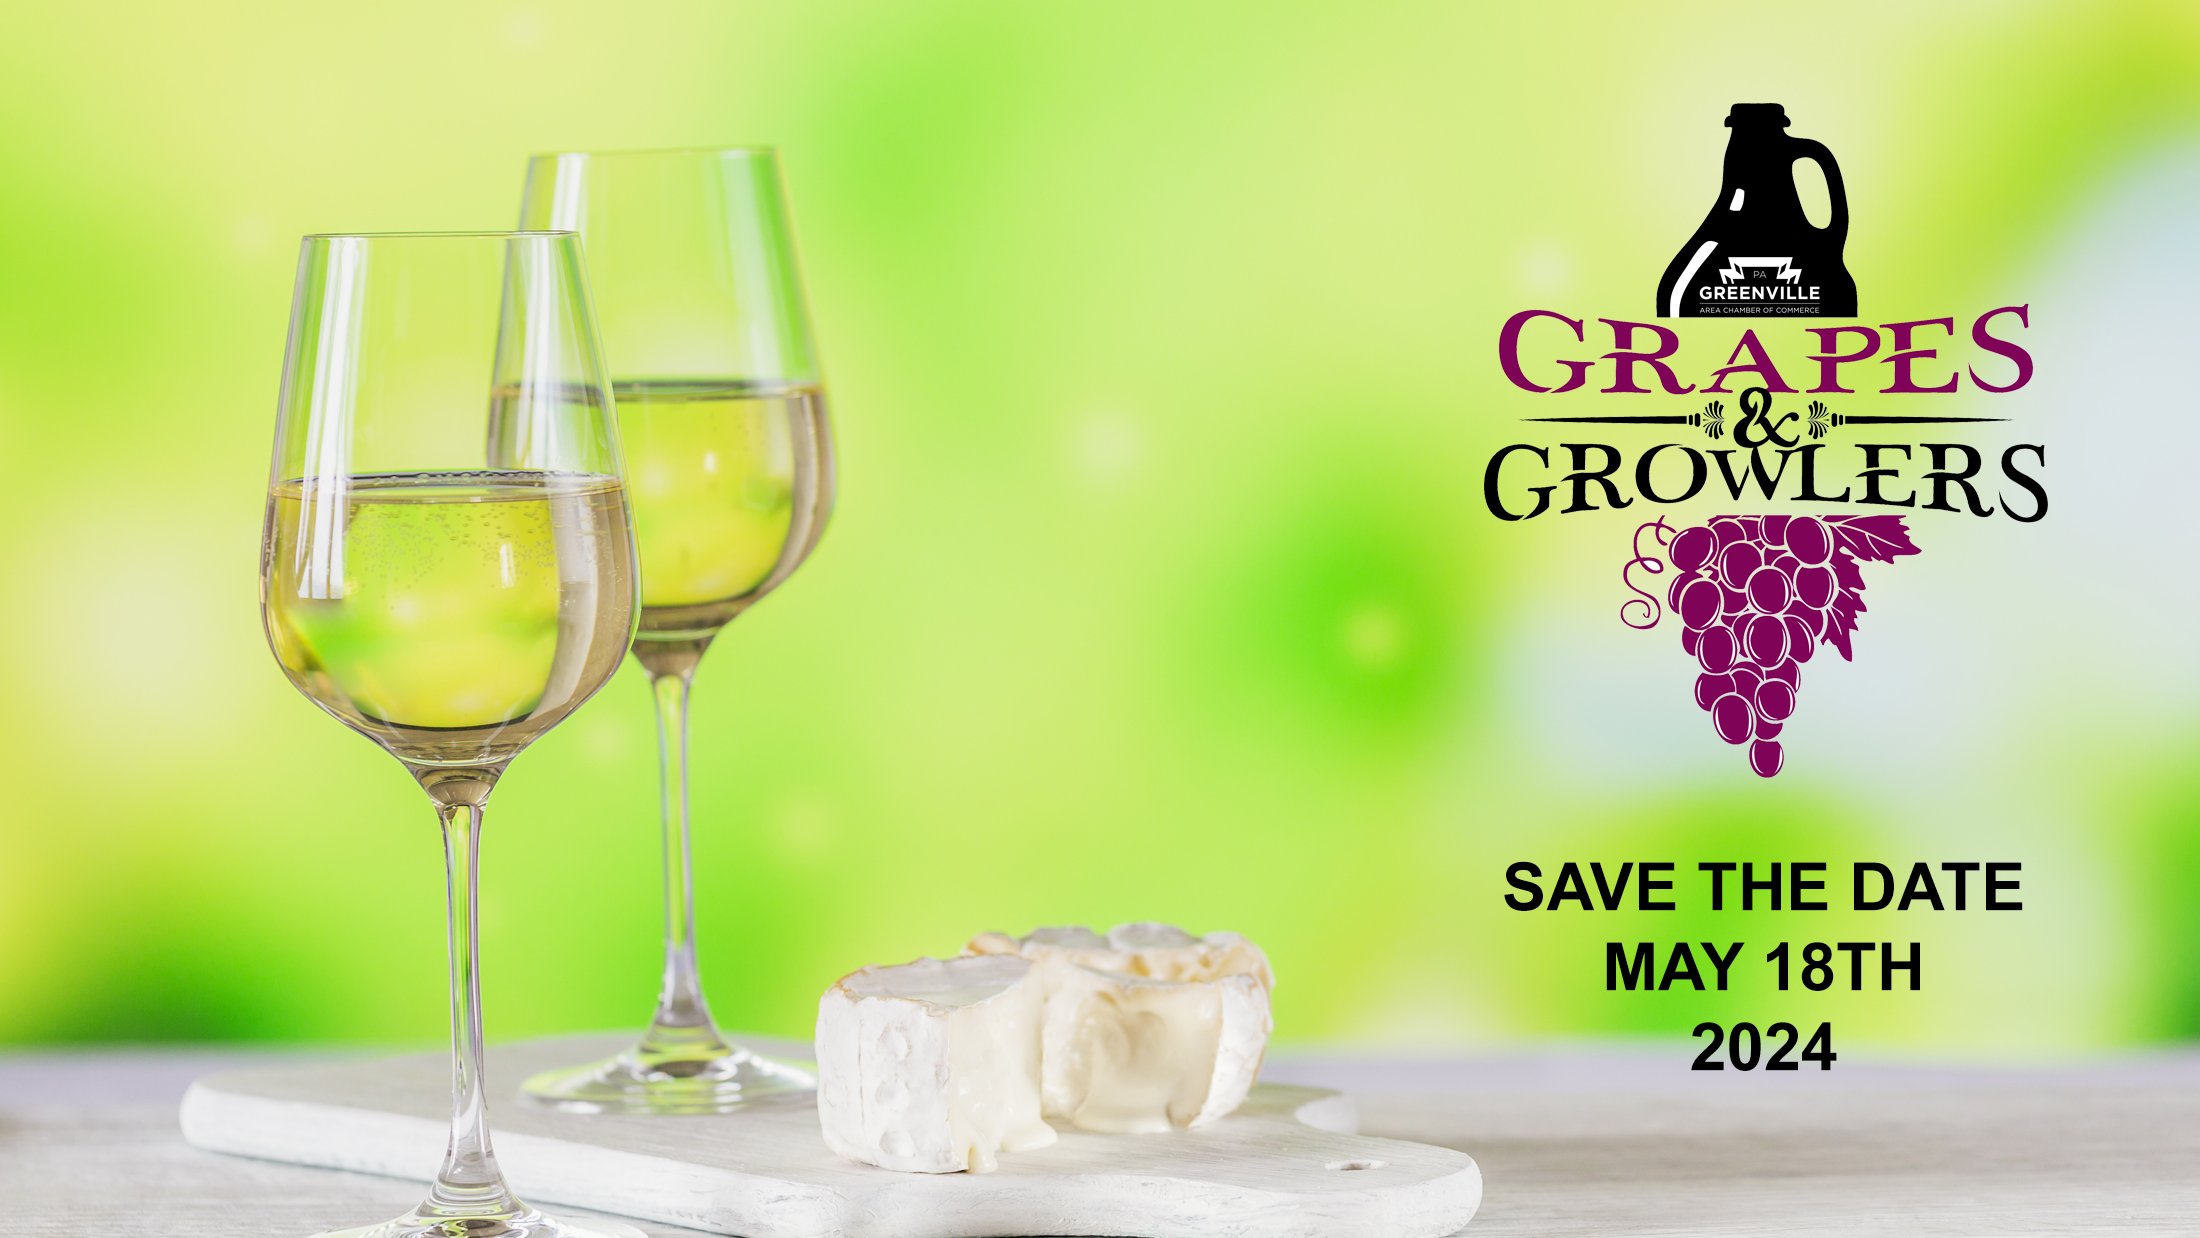 grapes save the date.jpg